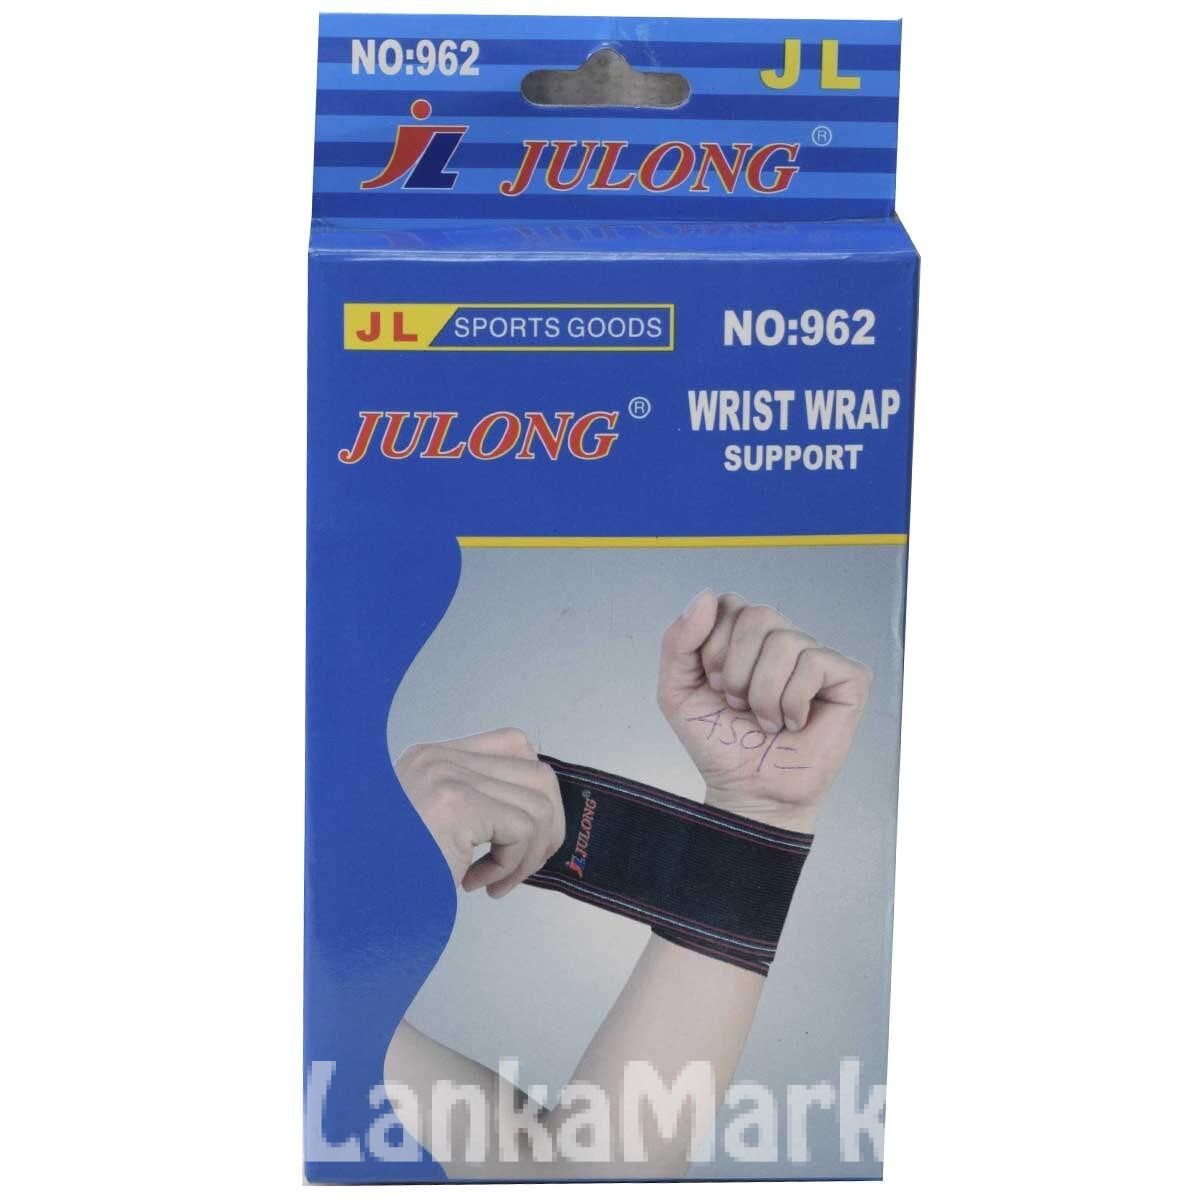 Wrist Wrap Support / Wrist Wrap Protector